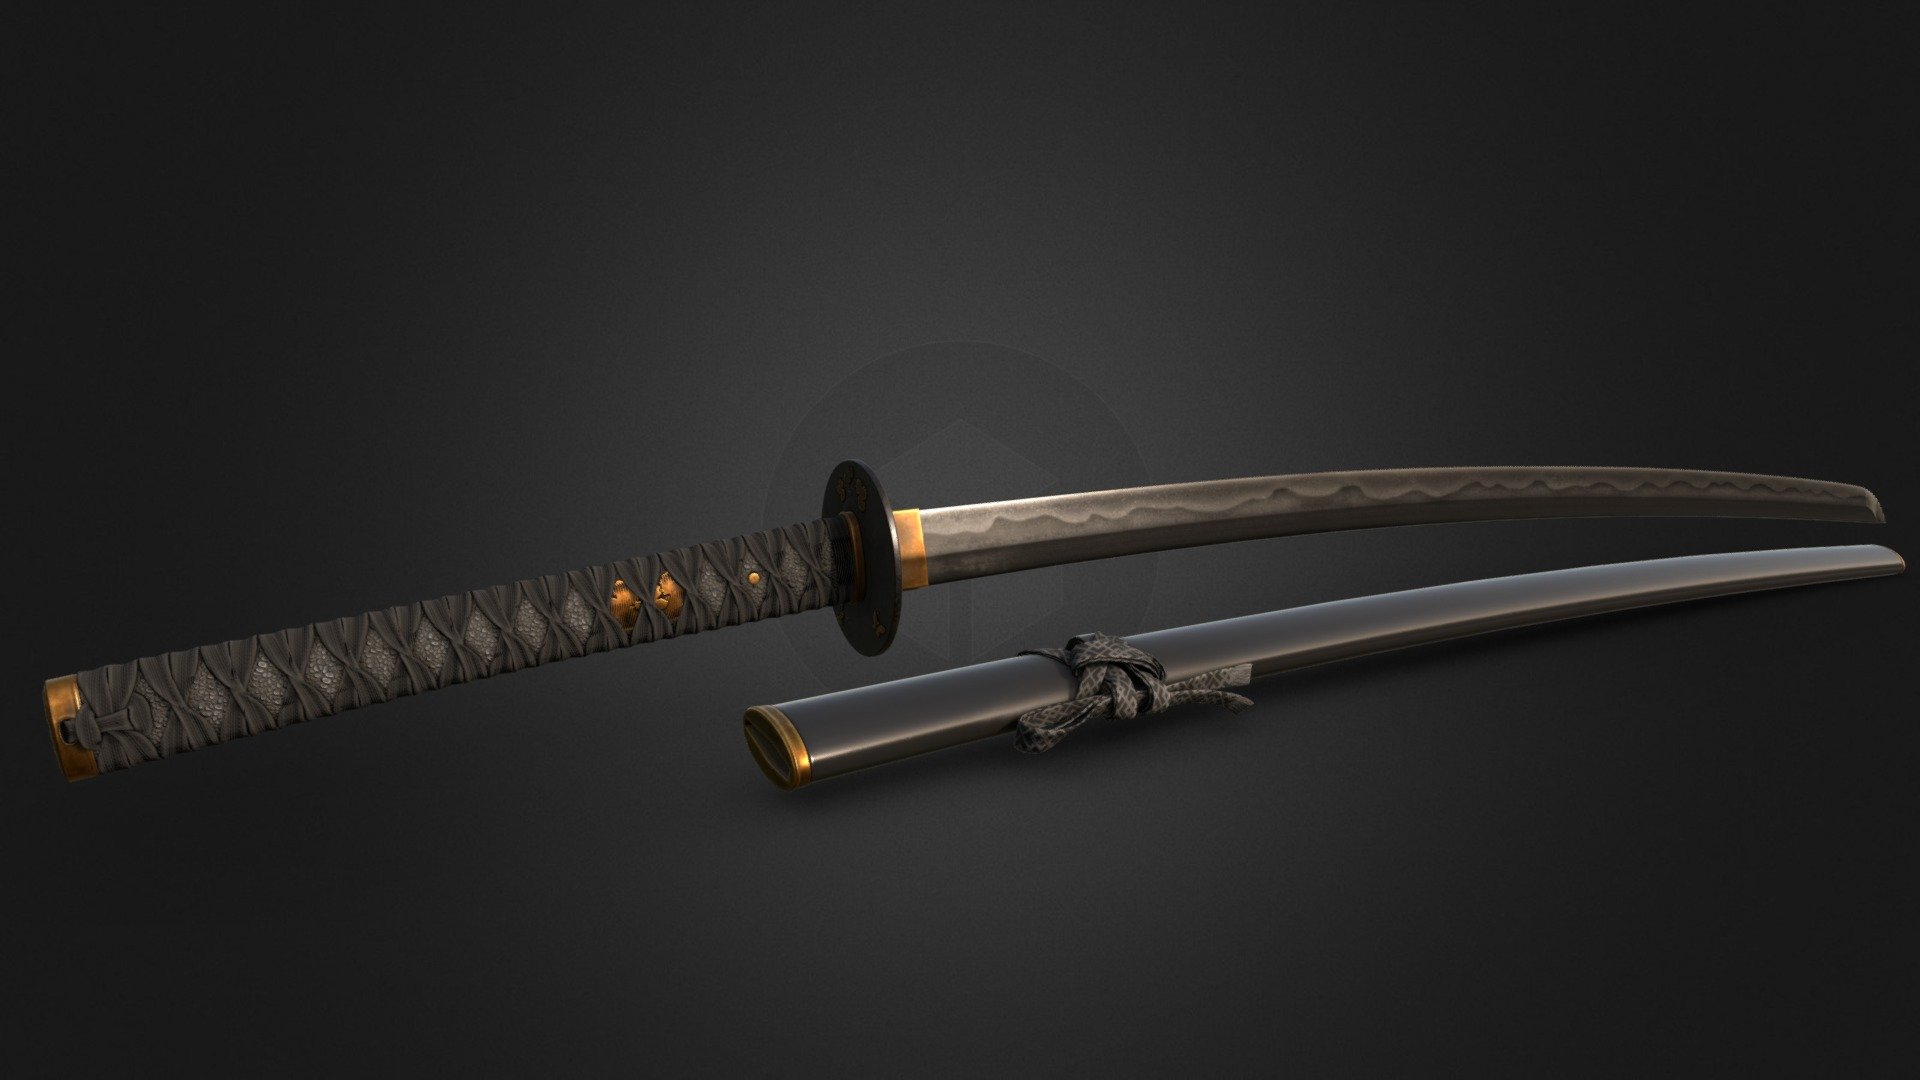 Katana with nature ornament low poly model.

4k textures. Total polycount 19218 tris.

Model created on Blander and ZBrush. Textured with Substance Painter 3d model